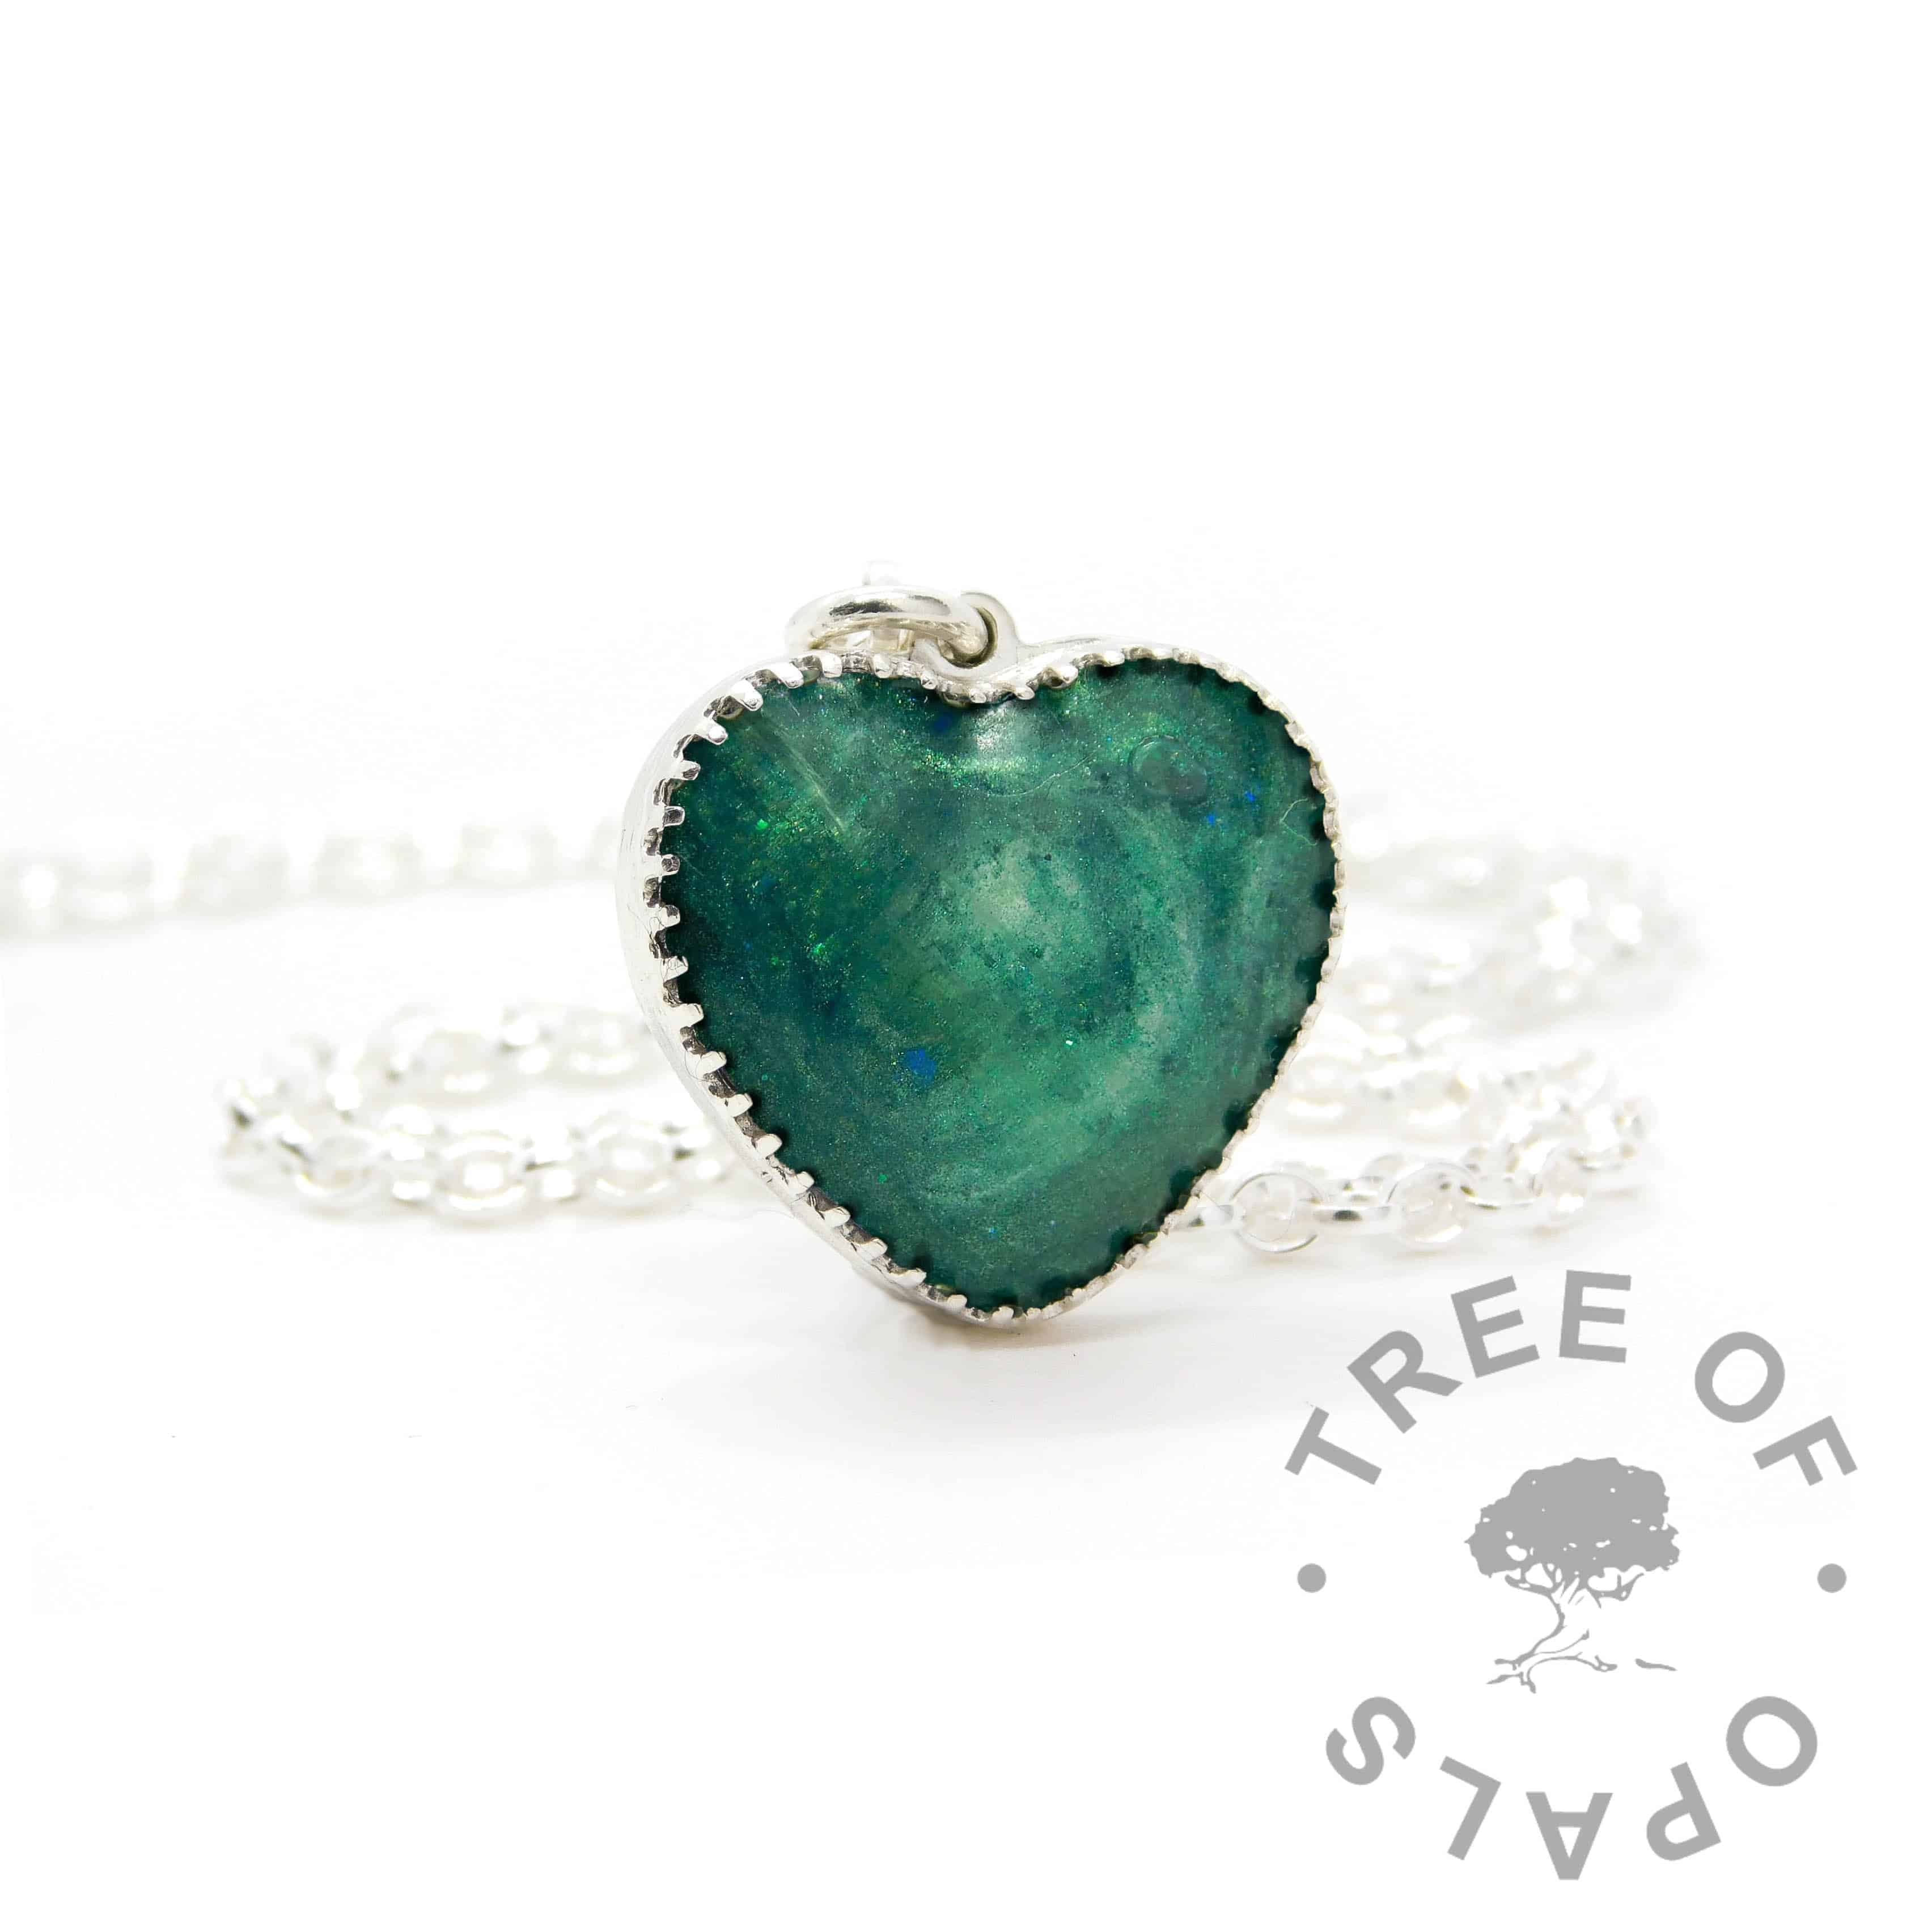 New style heart necklace setting with scalloped edge. Mermaid teal resin sparkle mix, lock of hair, shown with a medium classic chain upgrade (mockup of new setting). Remember that "white hair" is often translucent in resin!